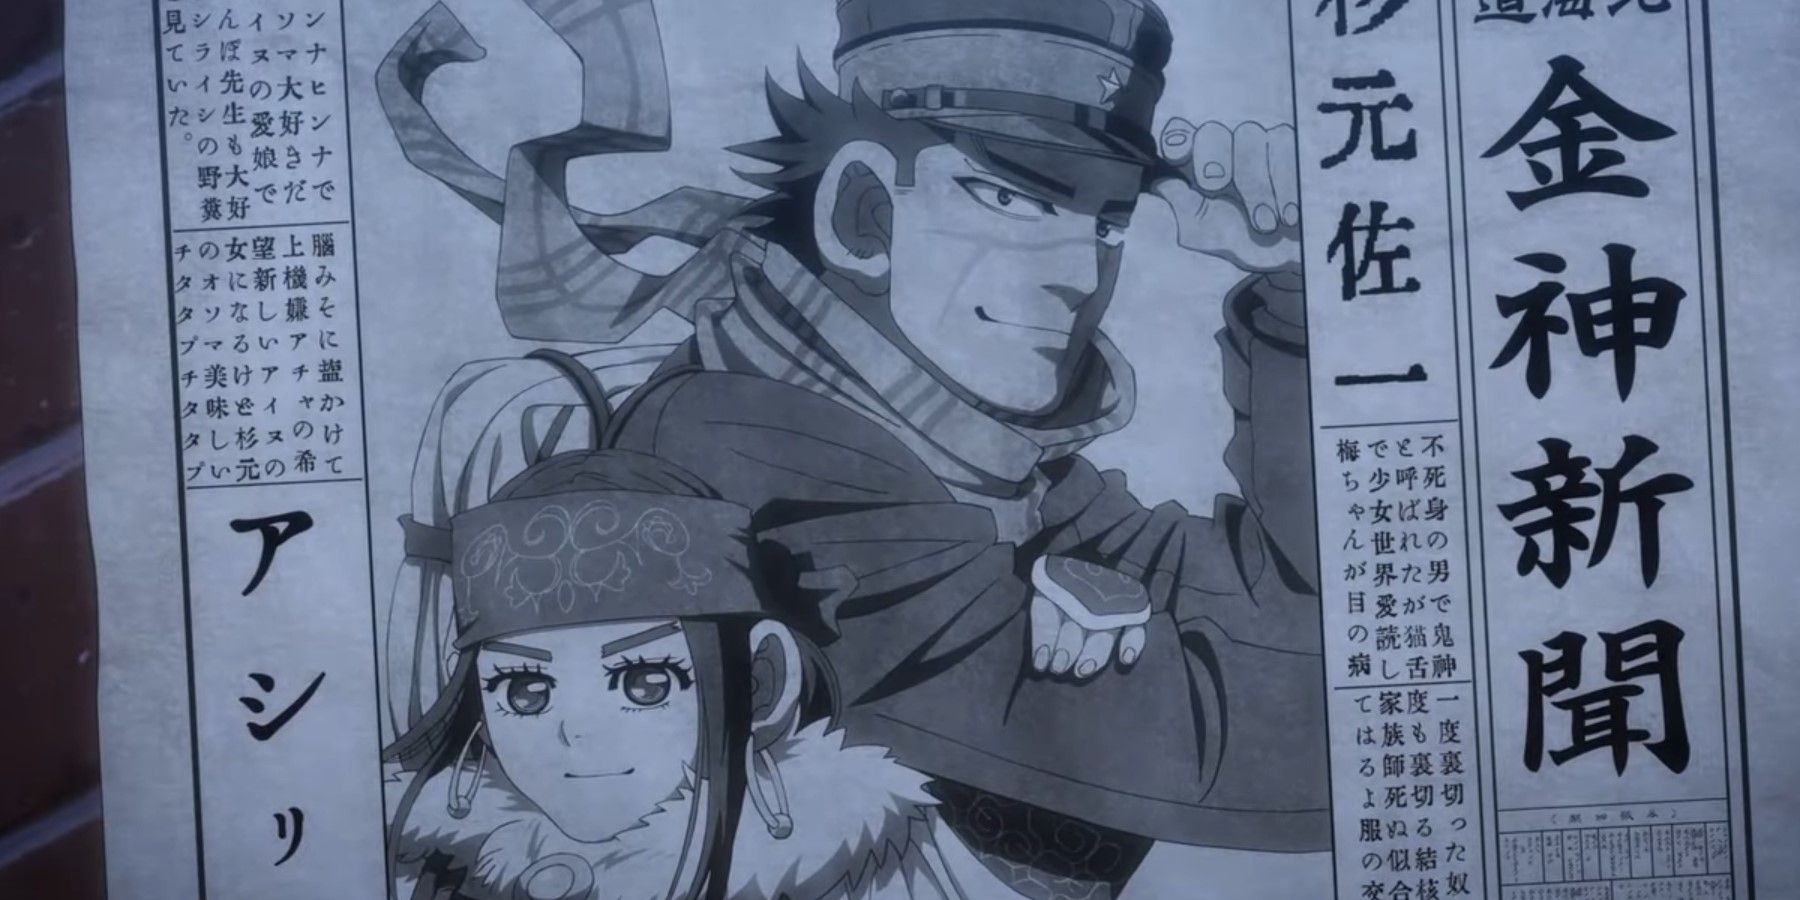 Sugimoto and Asirpa on a newspaper article